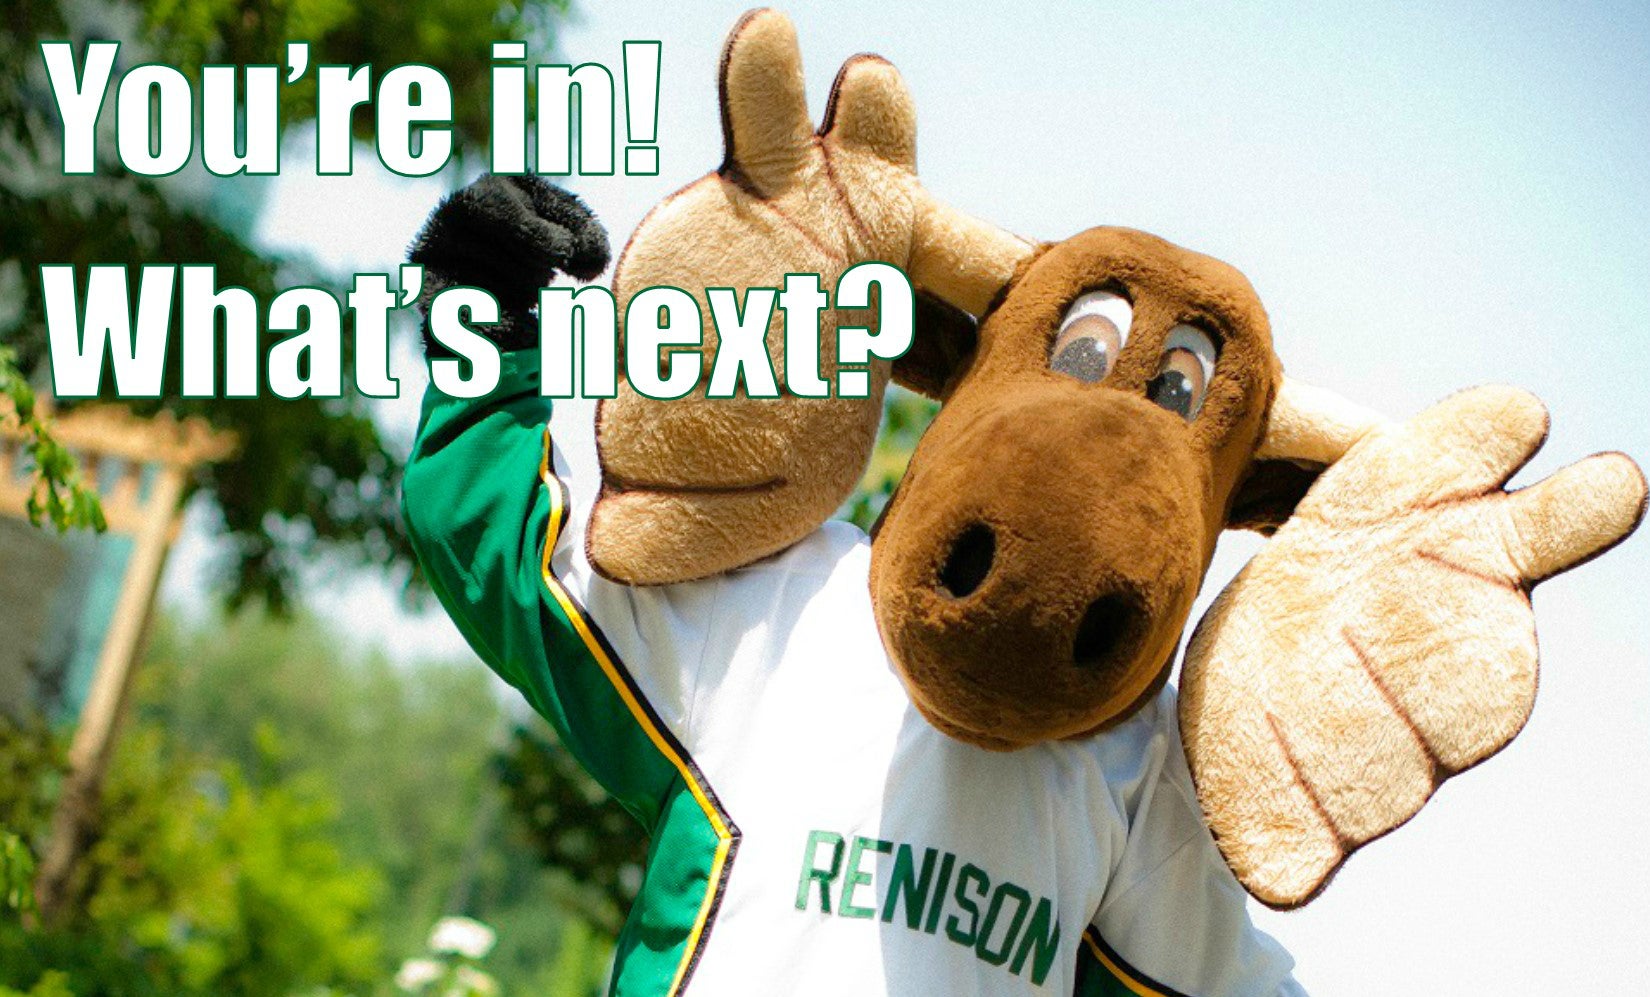 you're in what's next with renison moose mascot in sports jersey